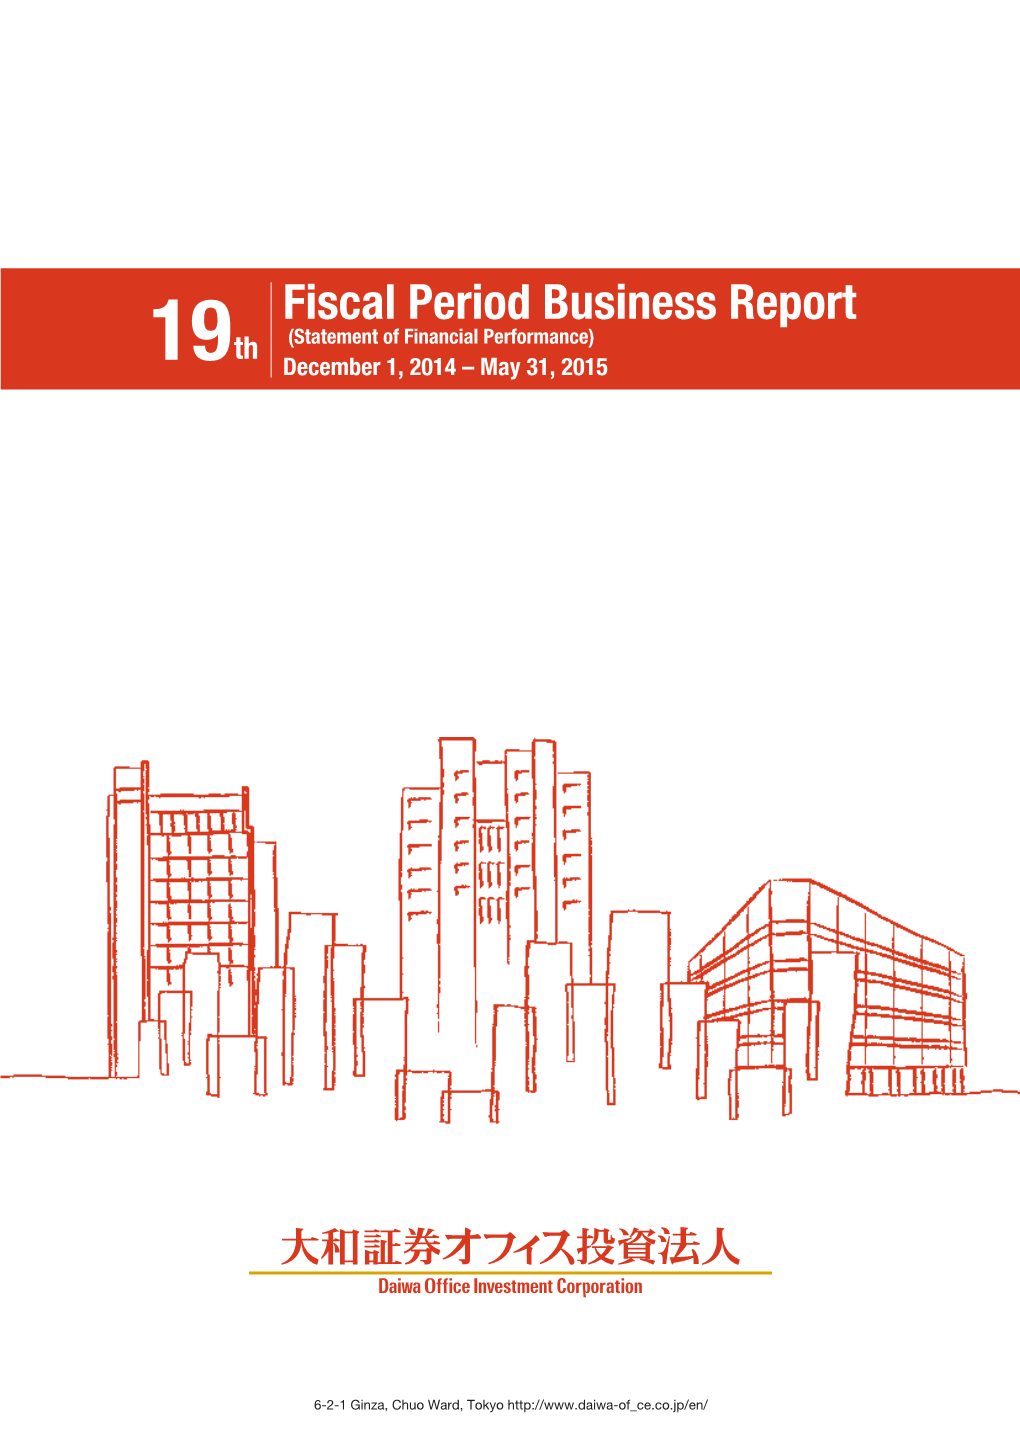 Fiscal Period Business Report Th (Statement of Financial Performance) 19 December 1, 2014 – May 31, 2015